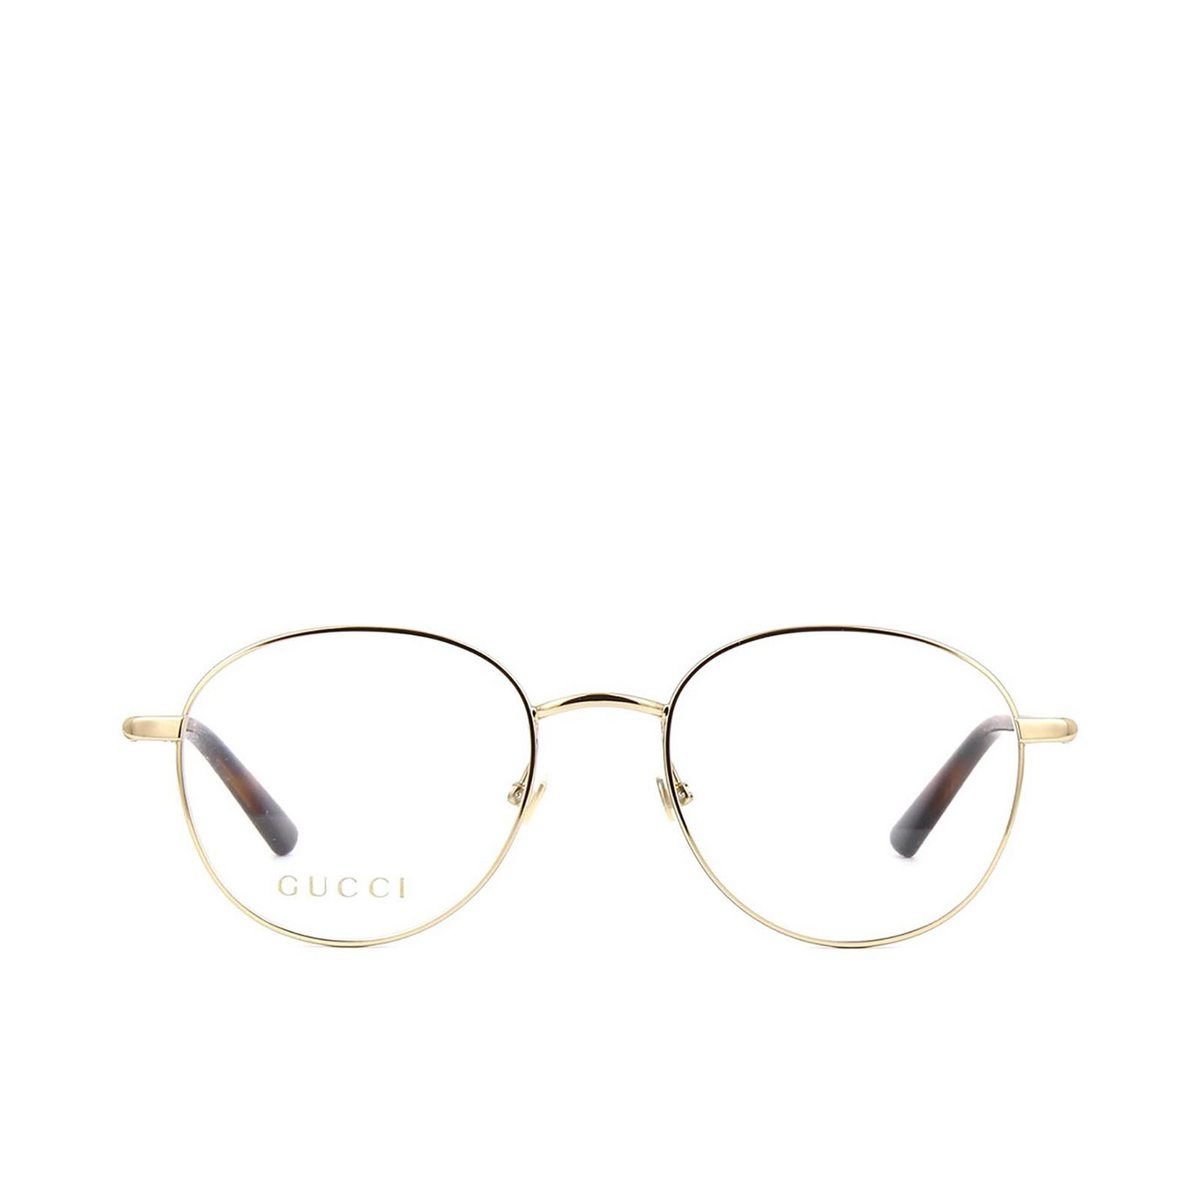 Gucci® Round Eyeglasses: GG0392O color Gold 003 - 1/2.